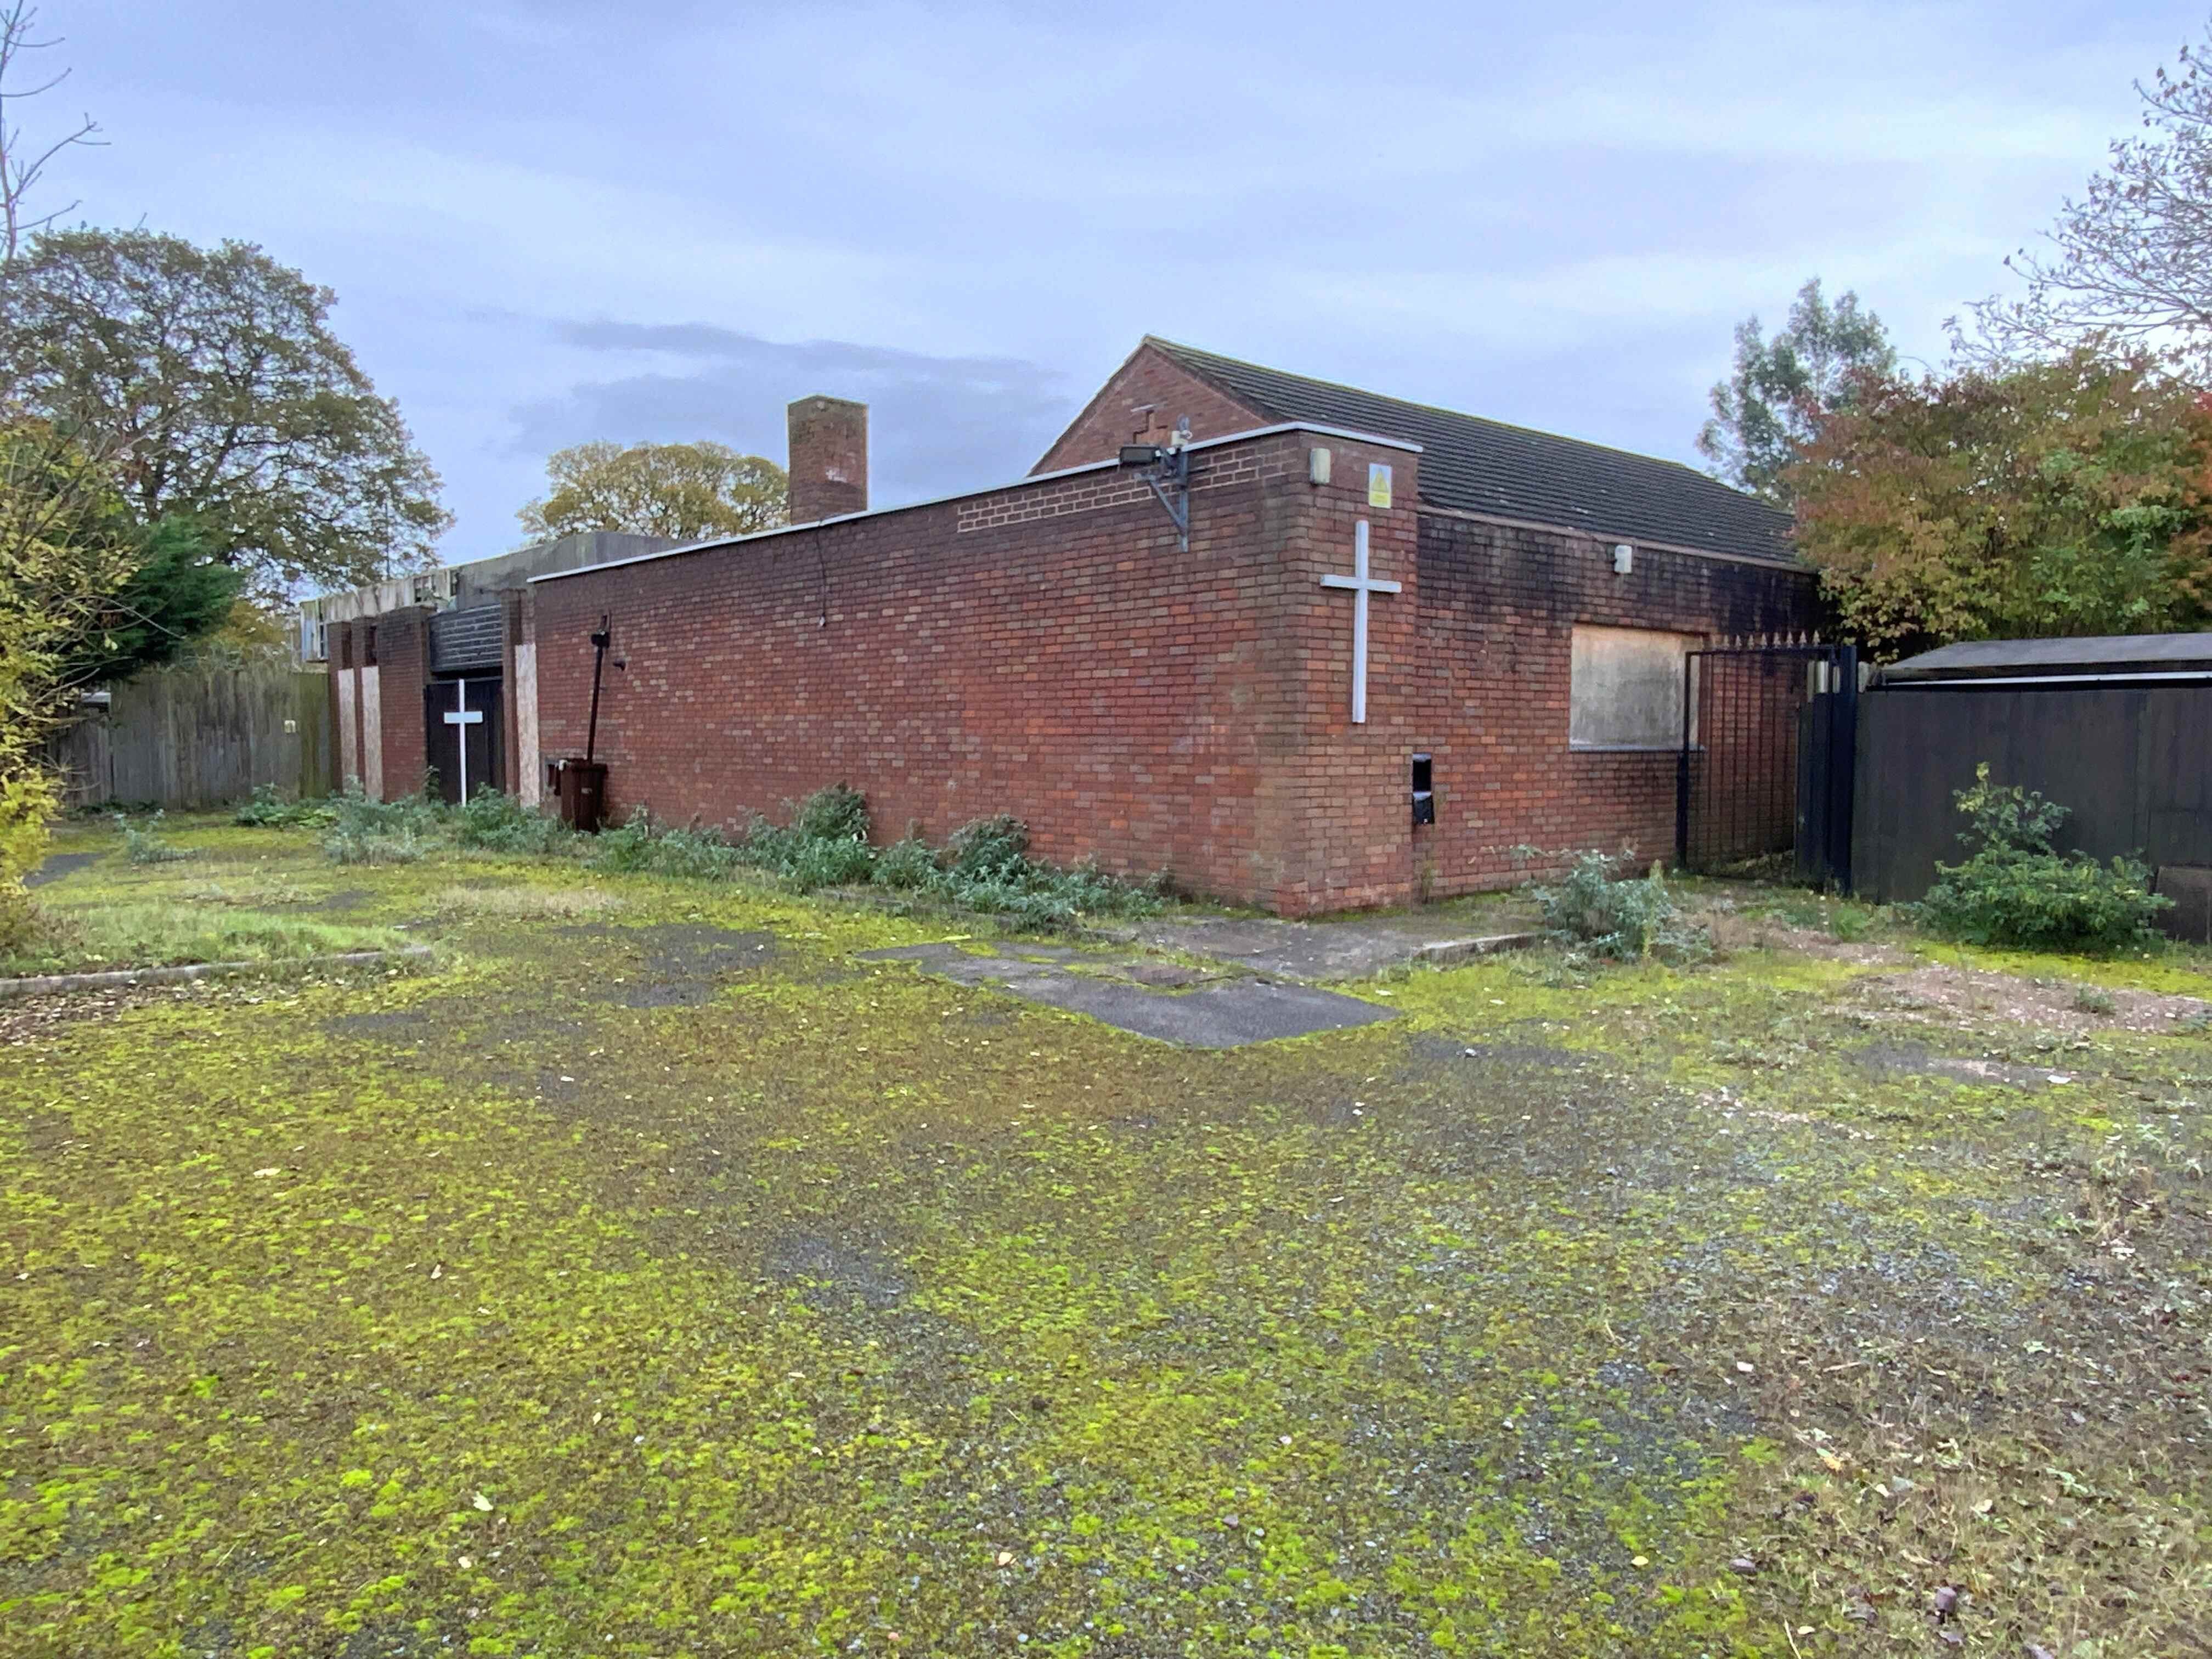 Second World War church in Wolverhampton that was ‘symbol of hope’ up for auction